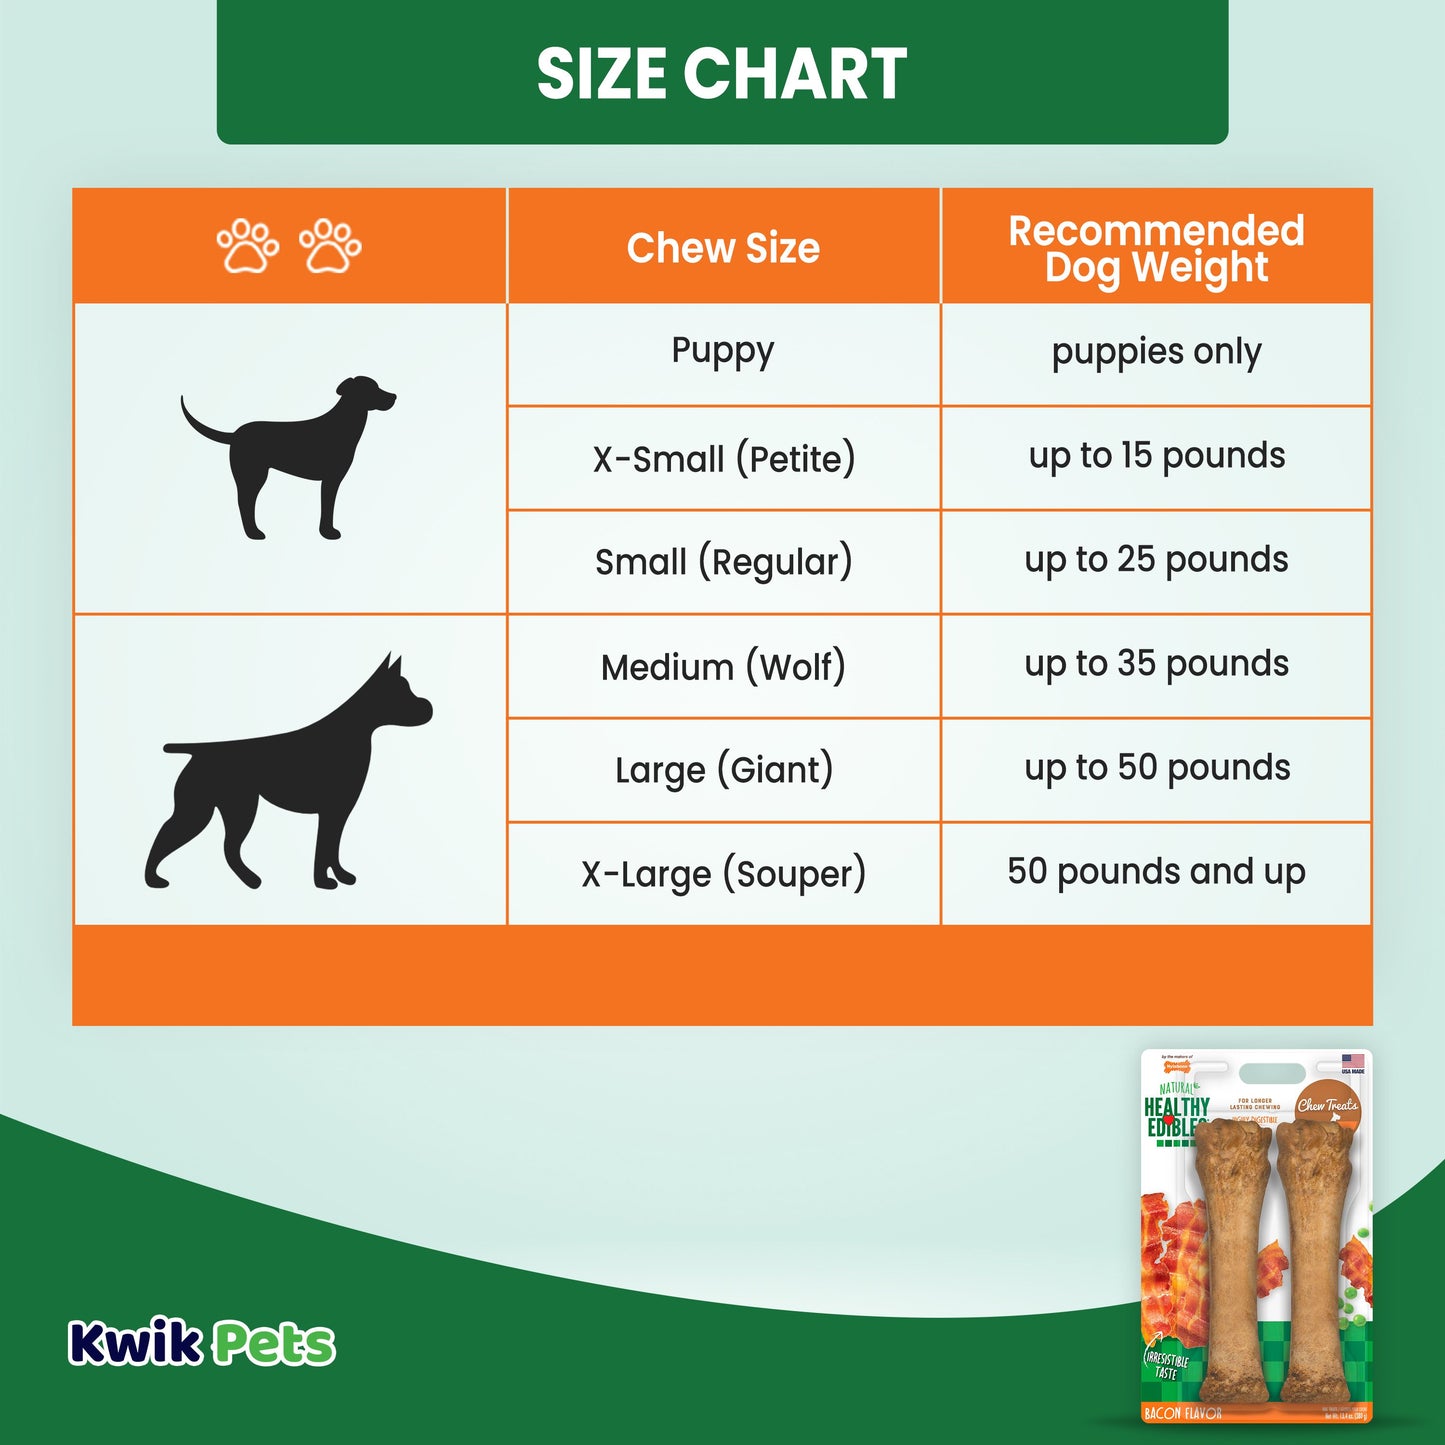 Nylabone Healthy Edibles Bacon Flavor Chew Treats, 2 counts dogs up to 50 lb - 6